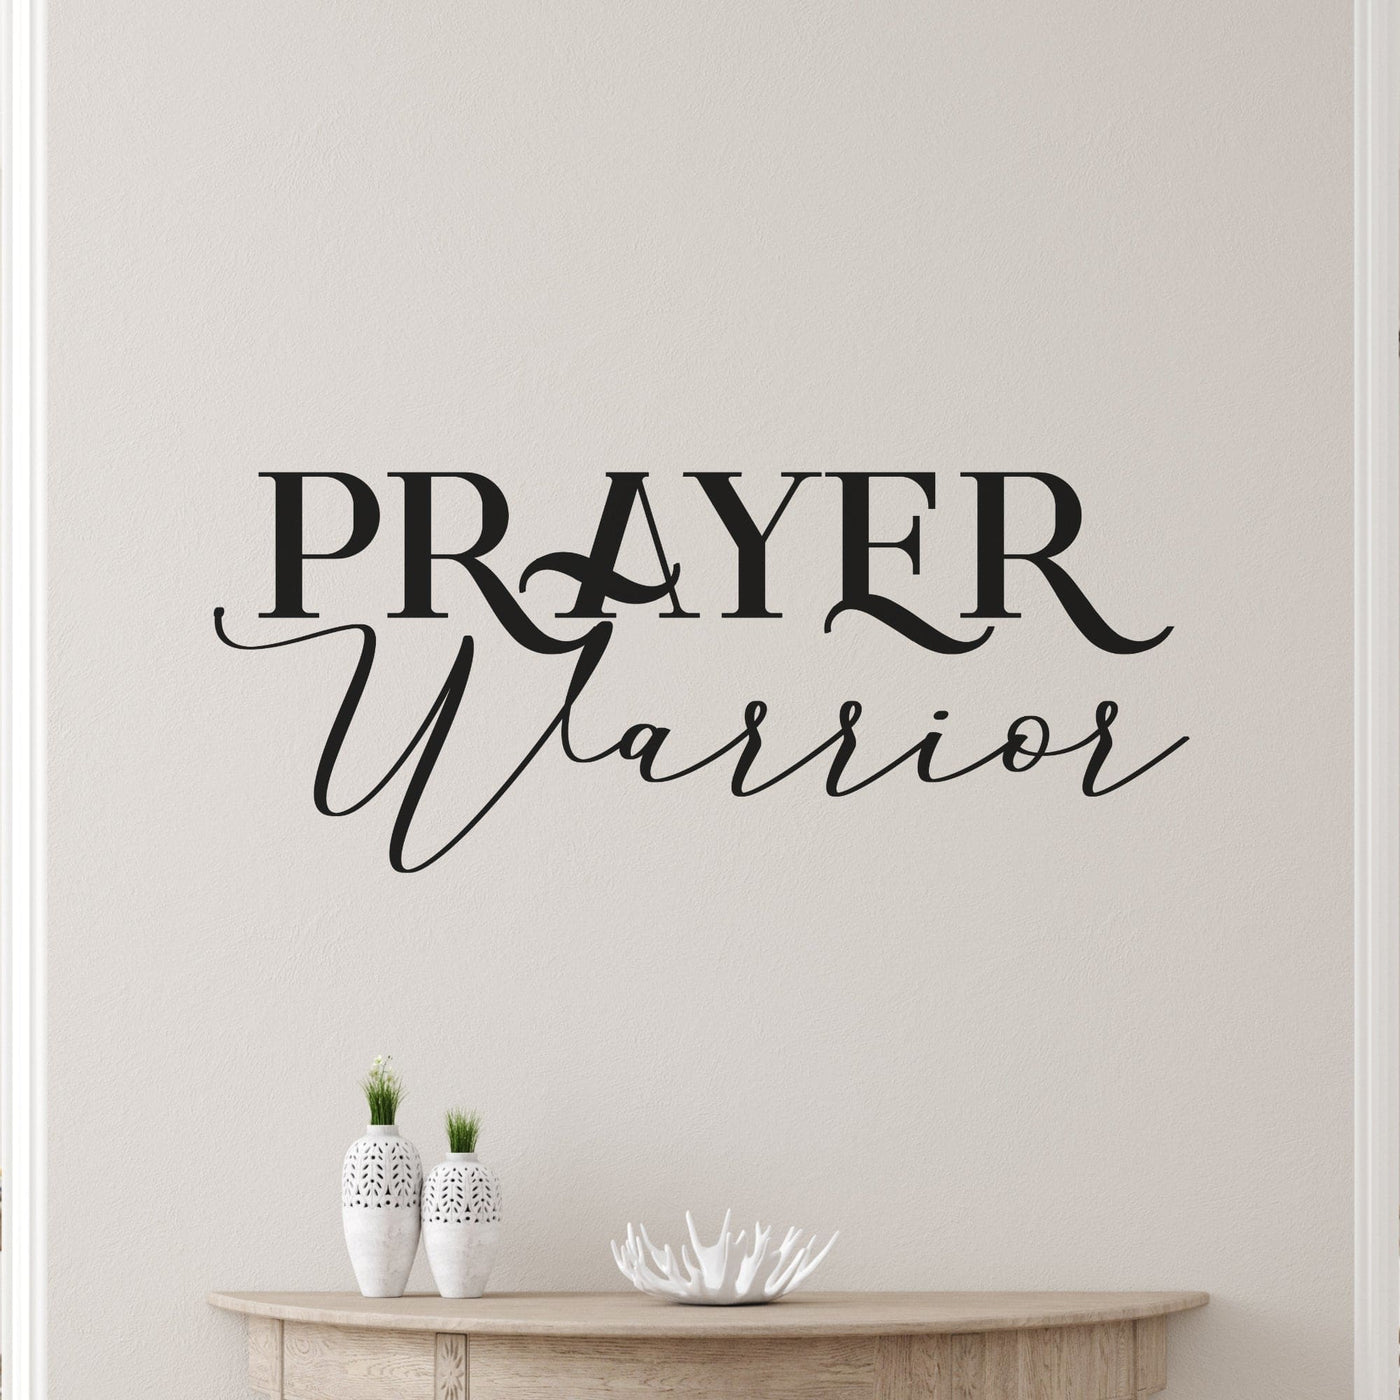 Decor - Prayer Warrior Removable Vinyl Wall Decal Easy Peel And Stick Wall Art